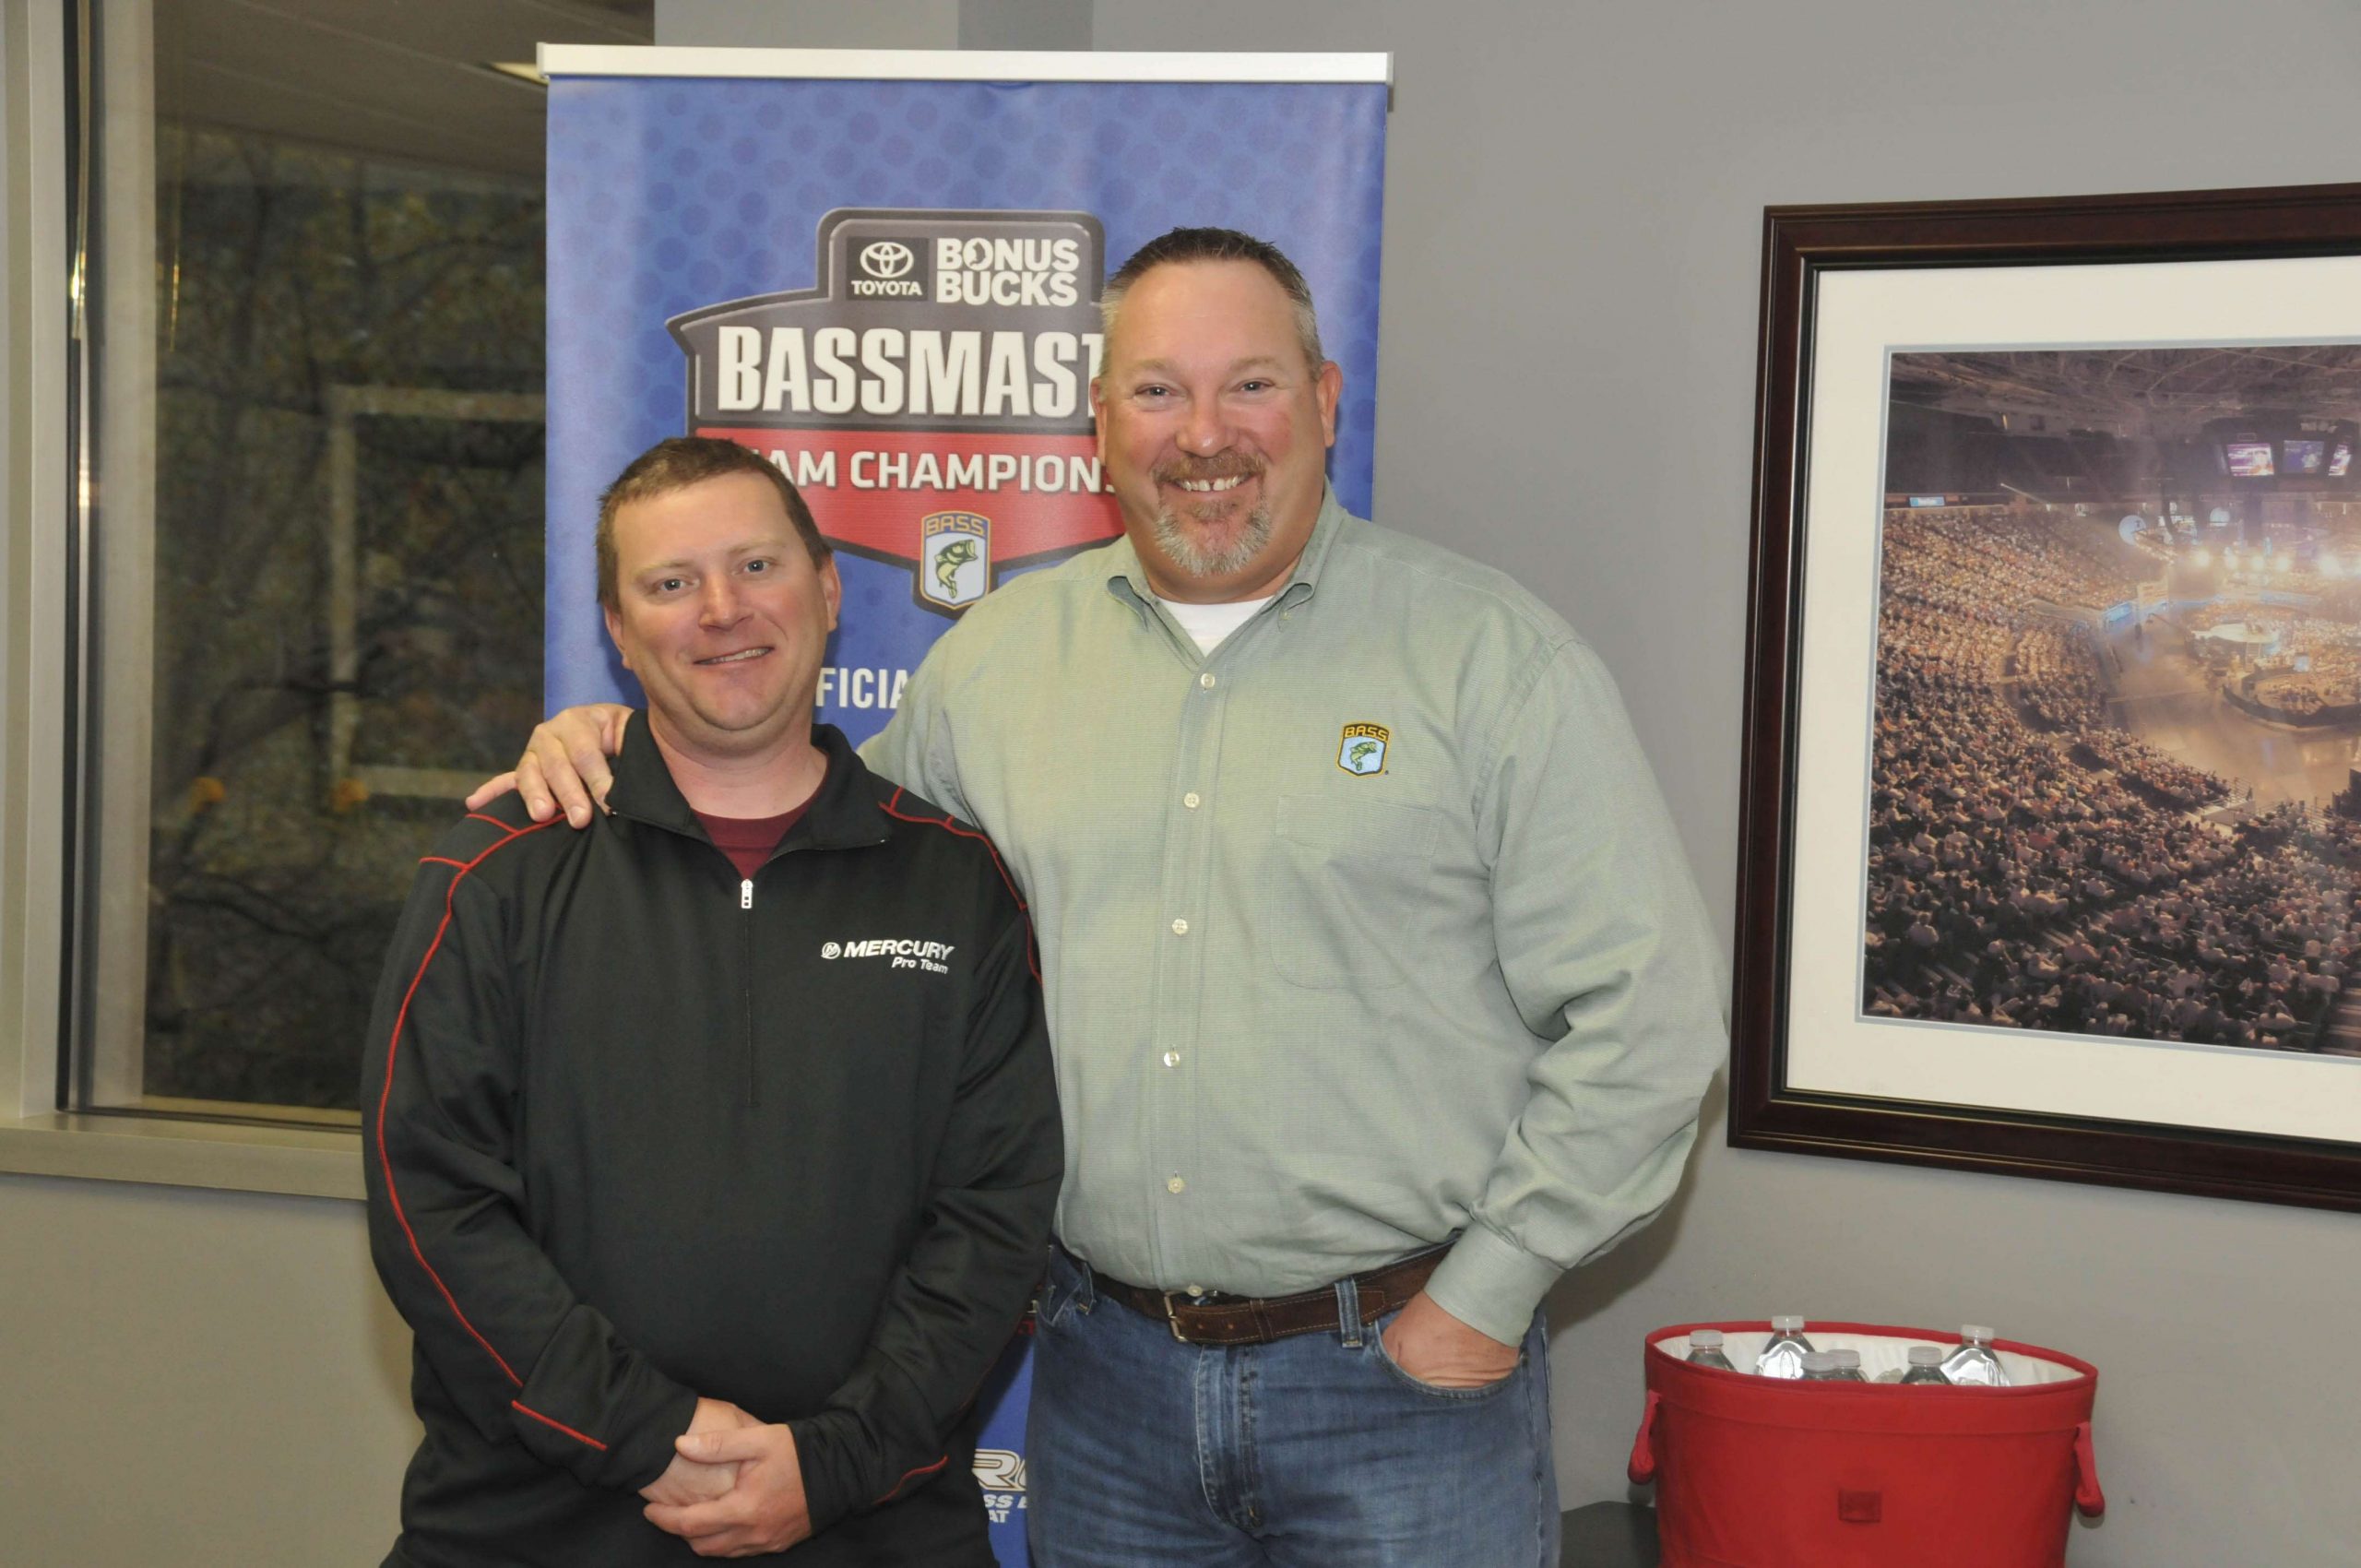 Jon Stewart, right, welcomed Brandon Gray to the B.A.S.S. headquarters office in Birmingham, Ala. Gray had just qualified for the 2015 Bassmaster Classic via the Toyota Bonus Bucks Bassmaster Team Championship and came to Birmingham to pick up the Skeeter/Yamaha he won.